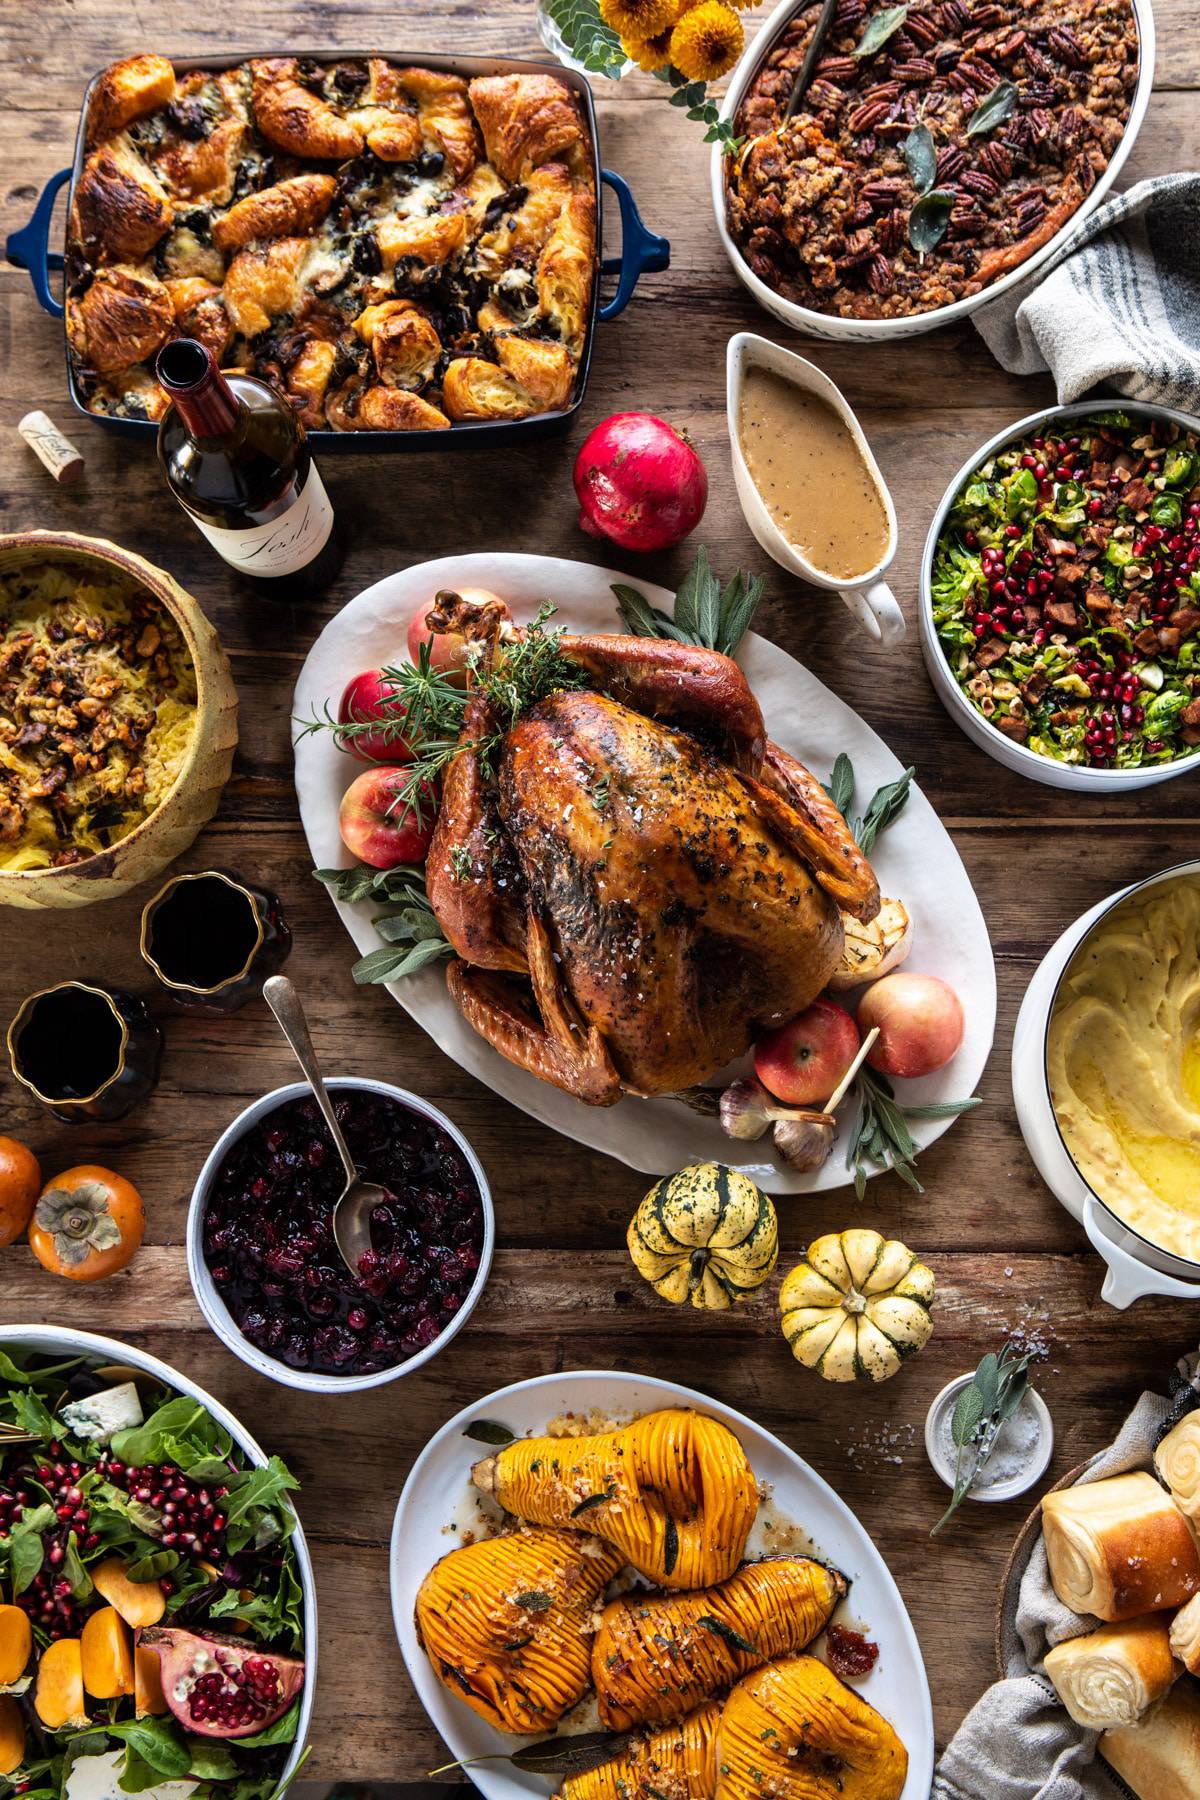 https://www.halfbakedharvest.com/wp-content/uploads/2019/11/Our-2019-Thanksgiving-Menu-and-Guide-1.jpg